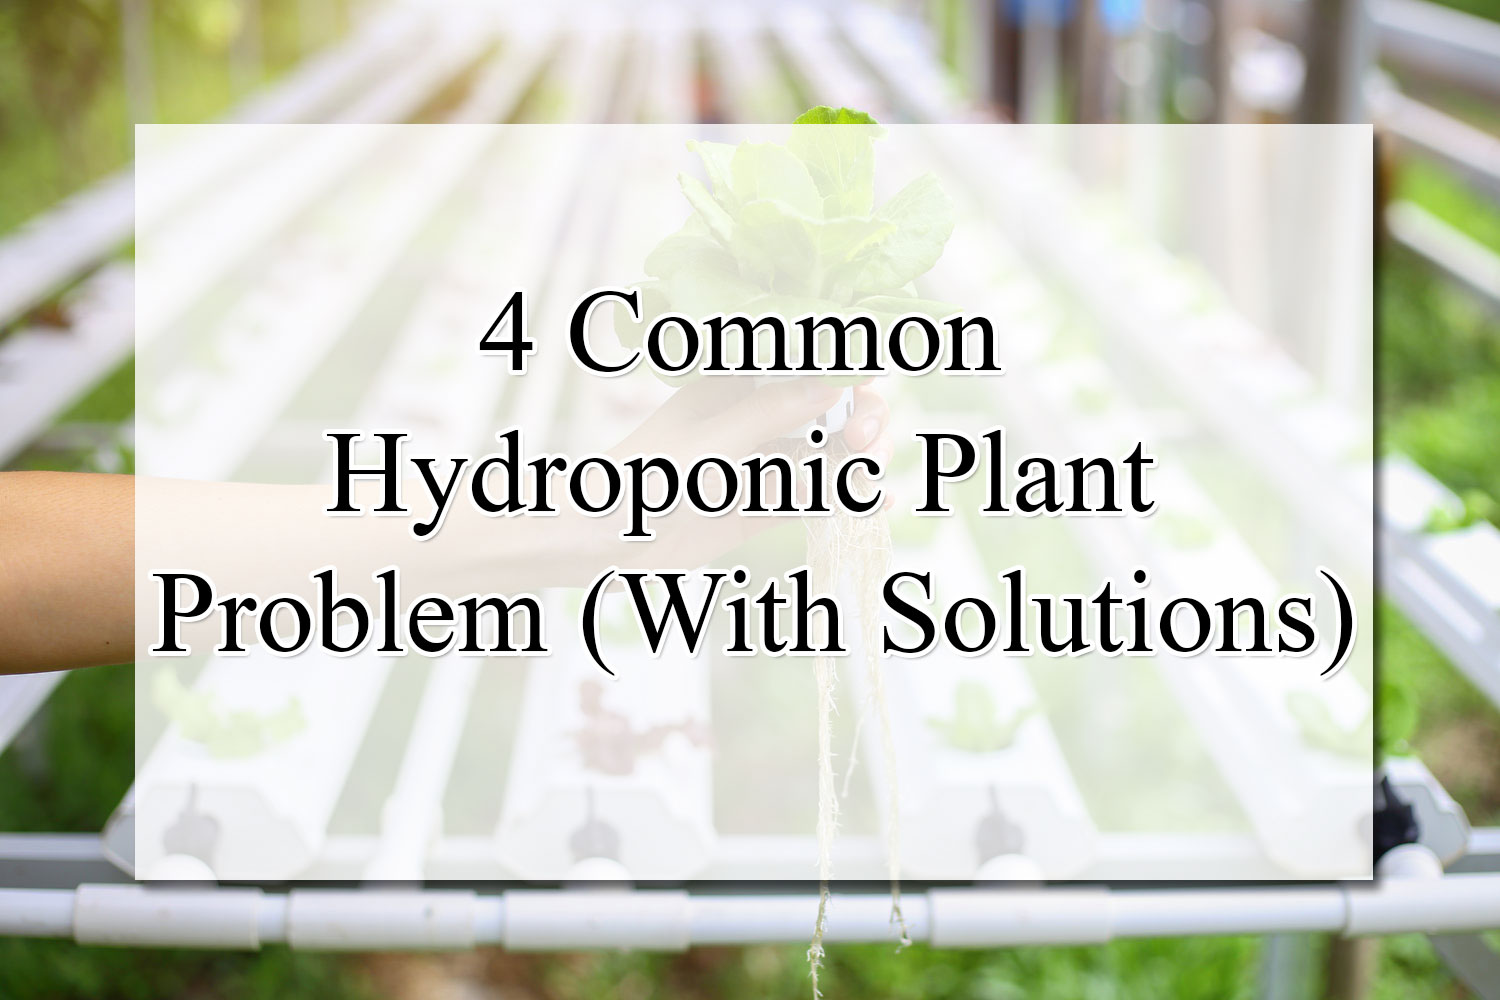 4 Common Hydroponic Plant Problem (With Solutions)